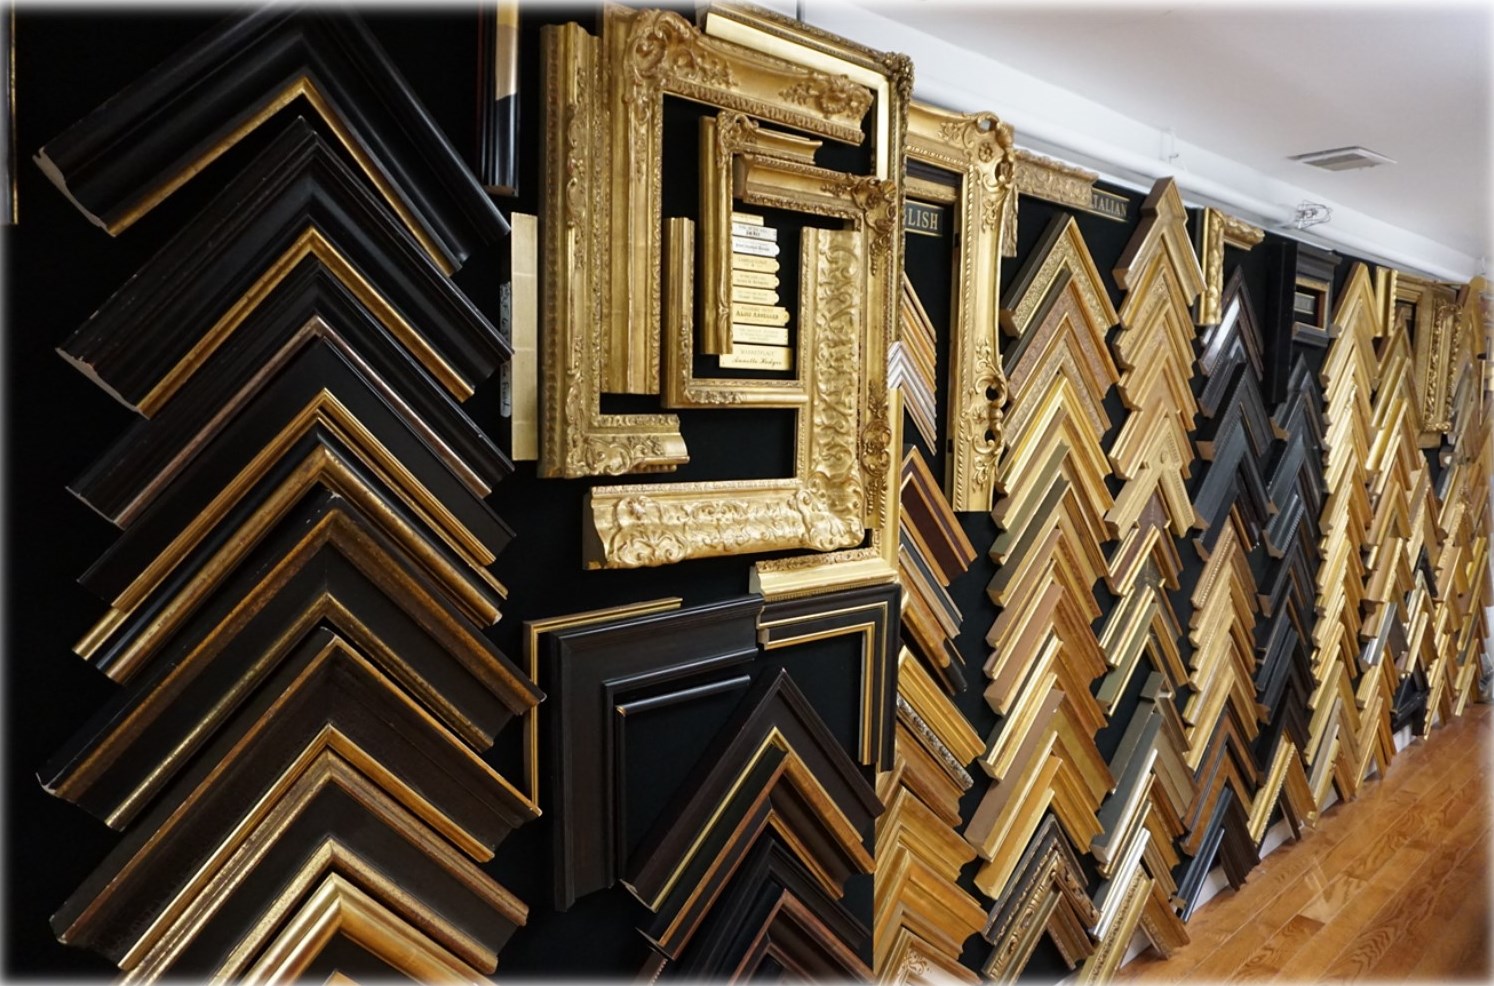 largest selection of gilded picture frames in the Metro Boston, custom picture framing